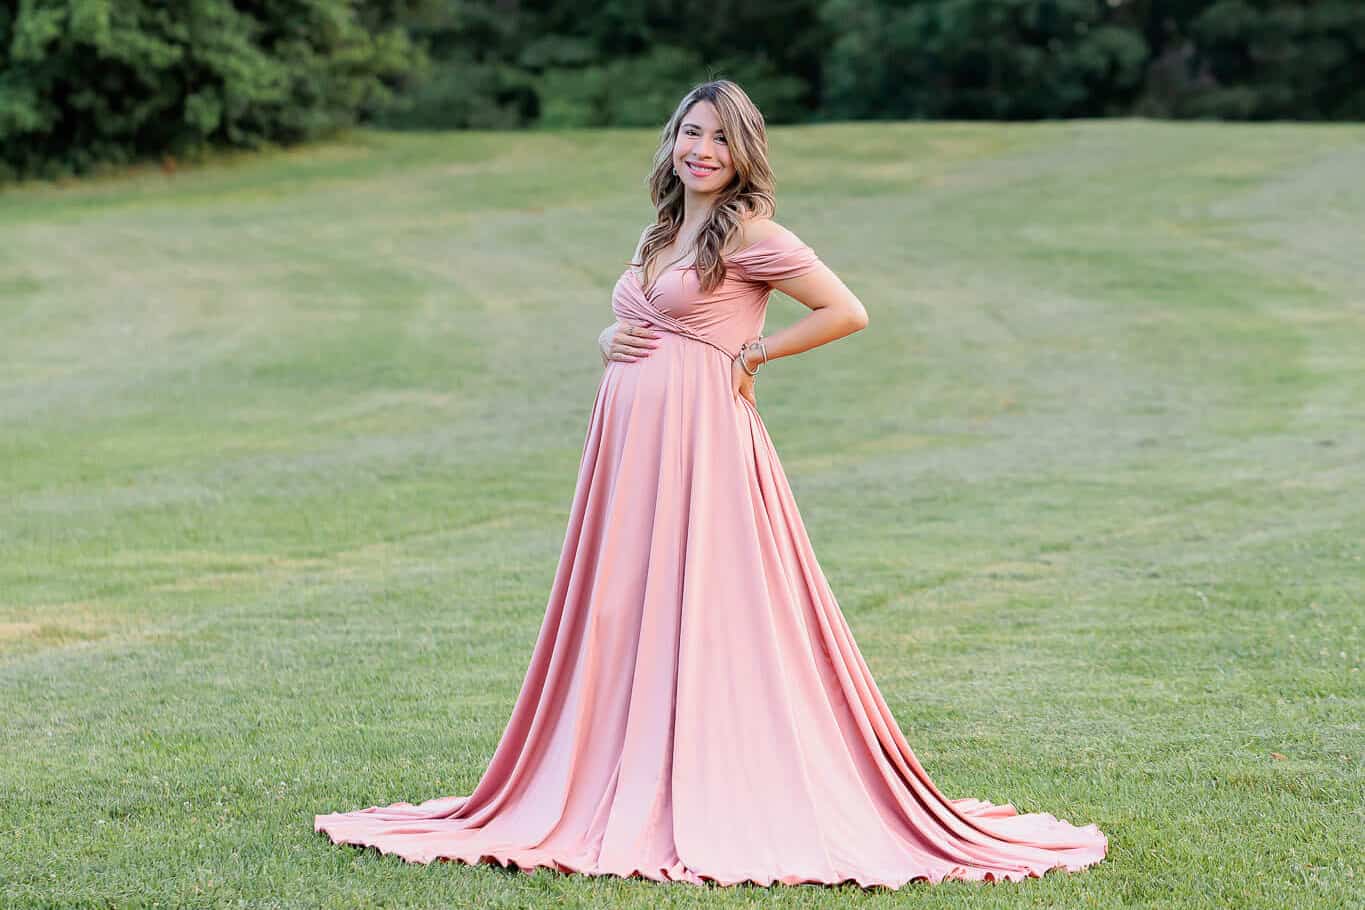 A blog about Fairfax Birth Care featuring a picture of a mother-to-be posing in a green field and wearing a pink dress.